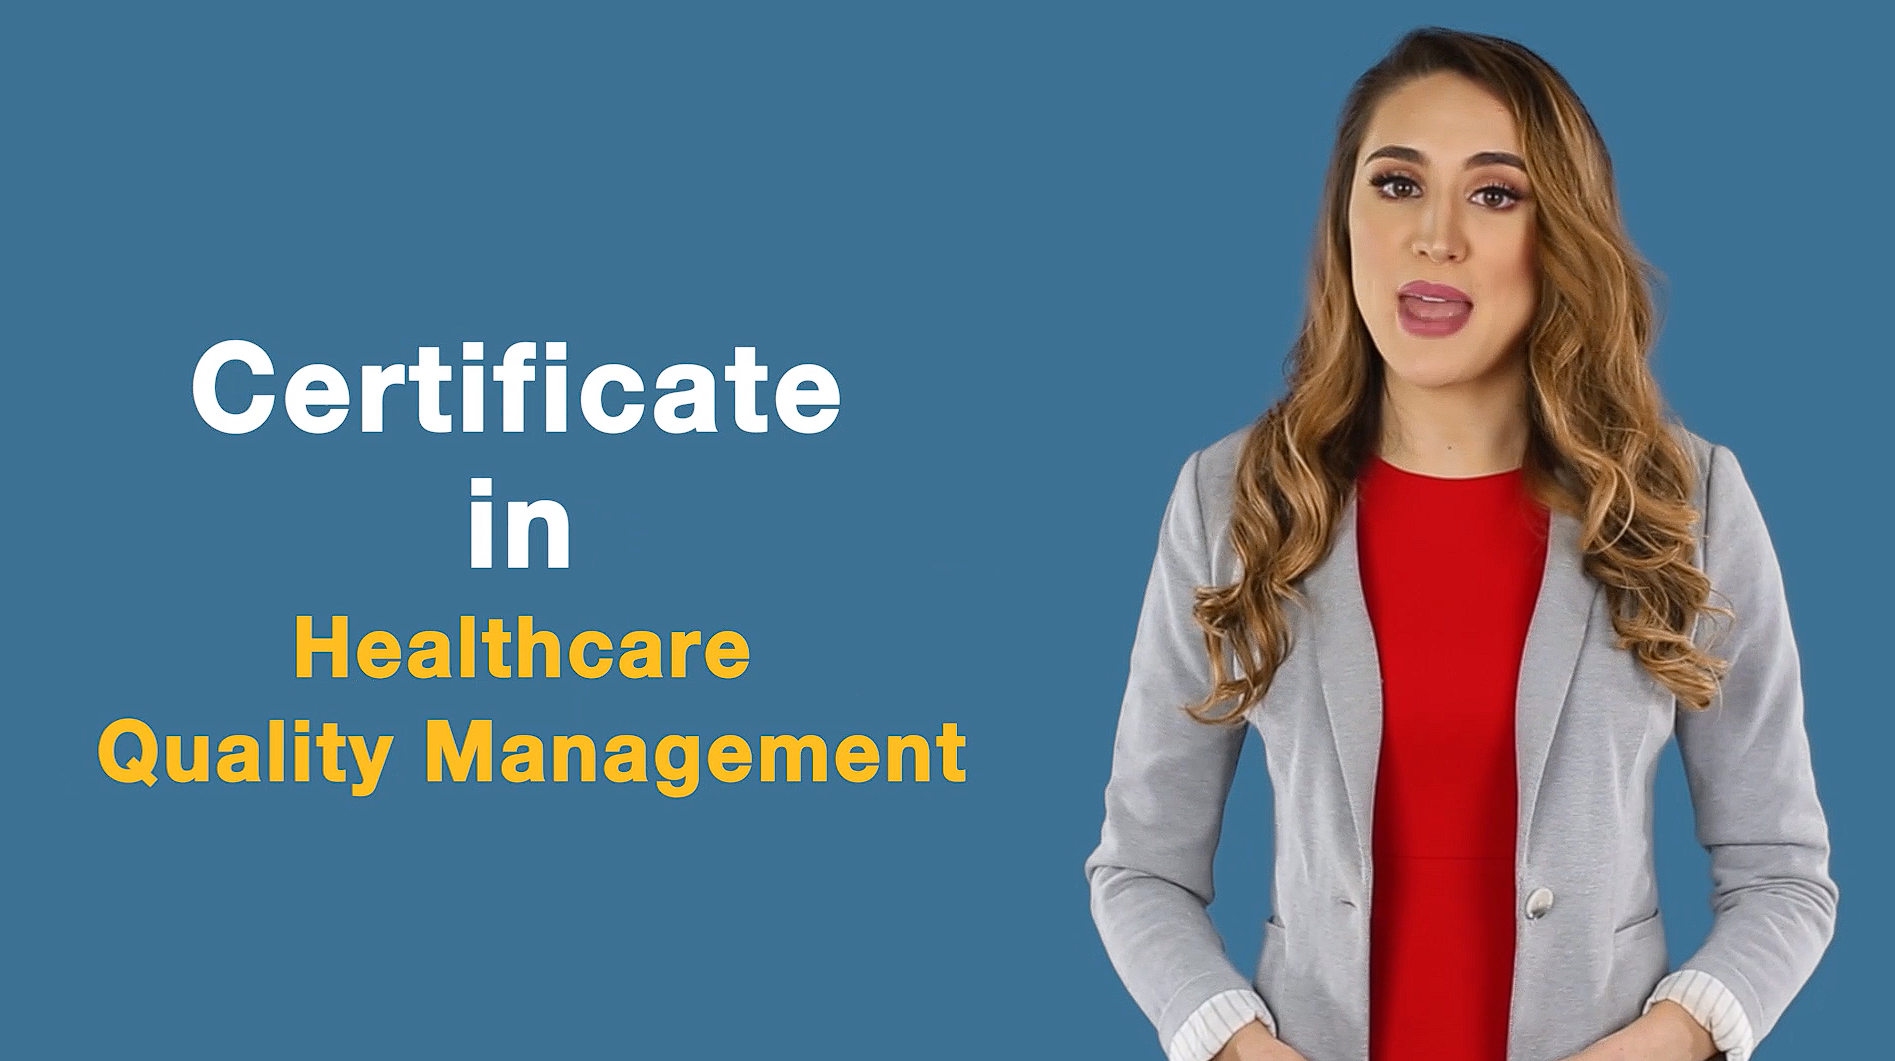 Certificate in Healthcare Quality Management